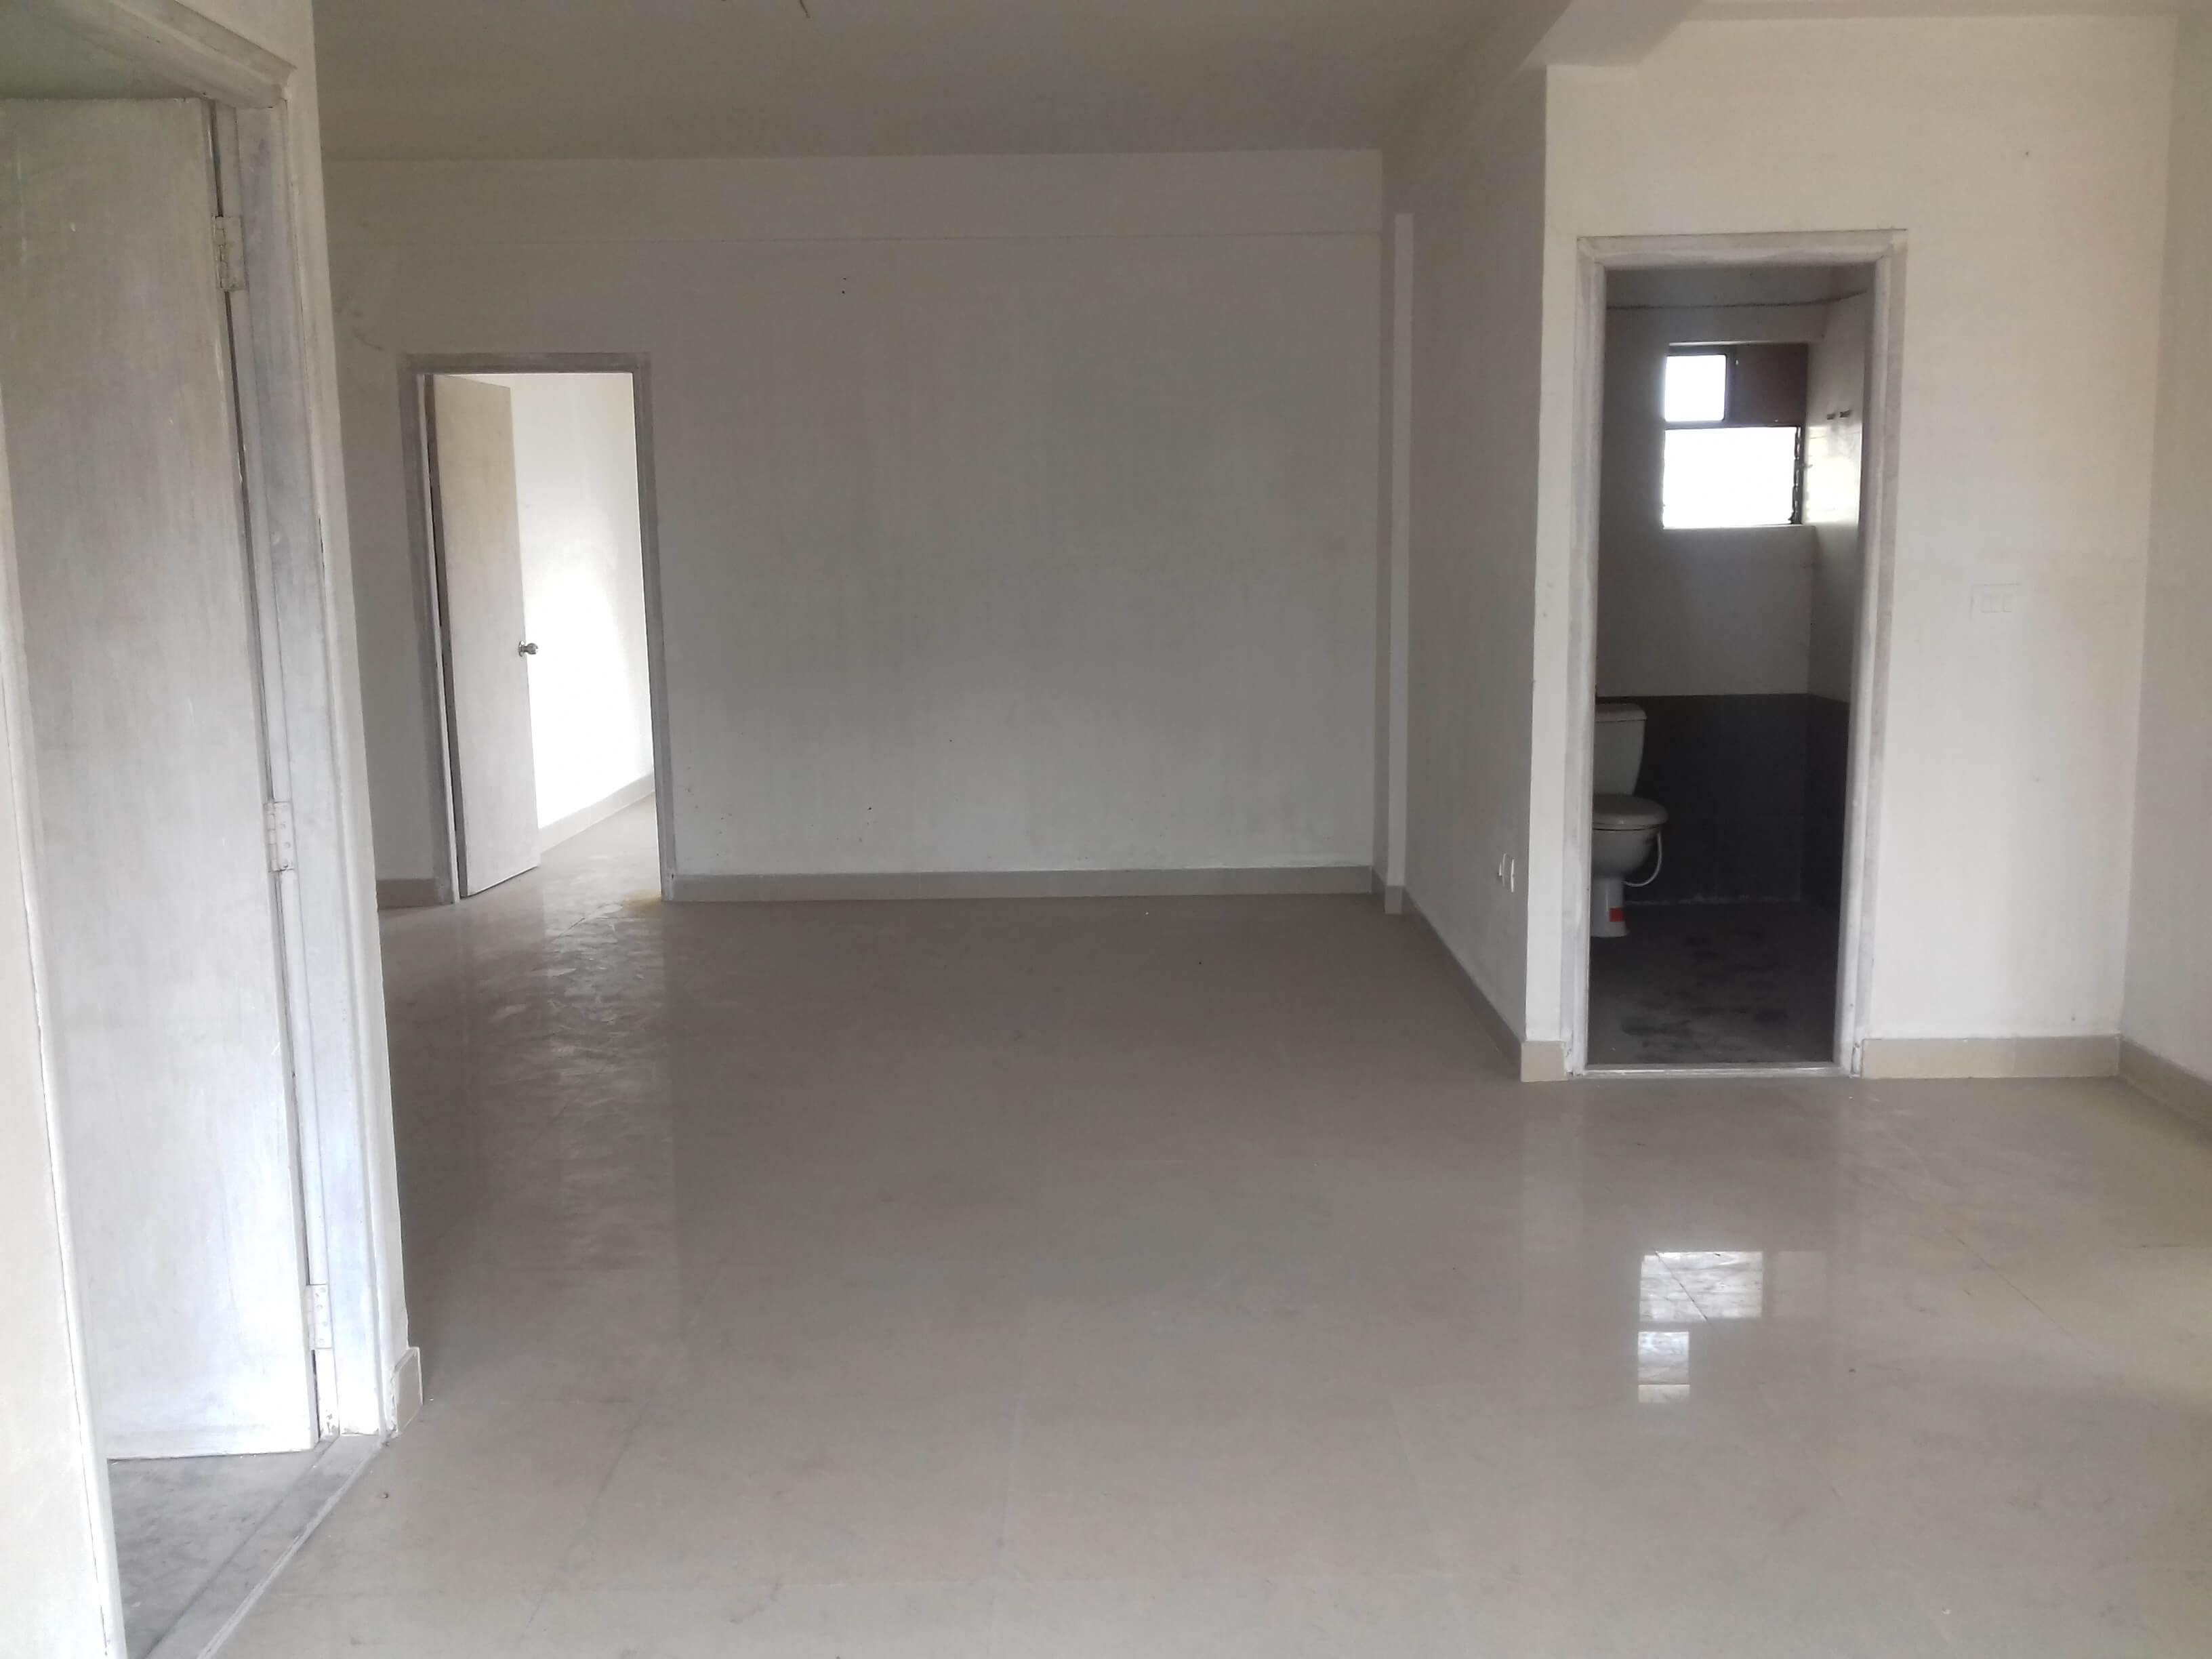 Flat For Sale in E M Bypass Kolkata (Id: 8143)